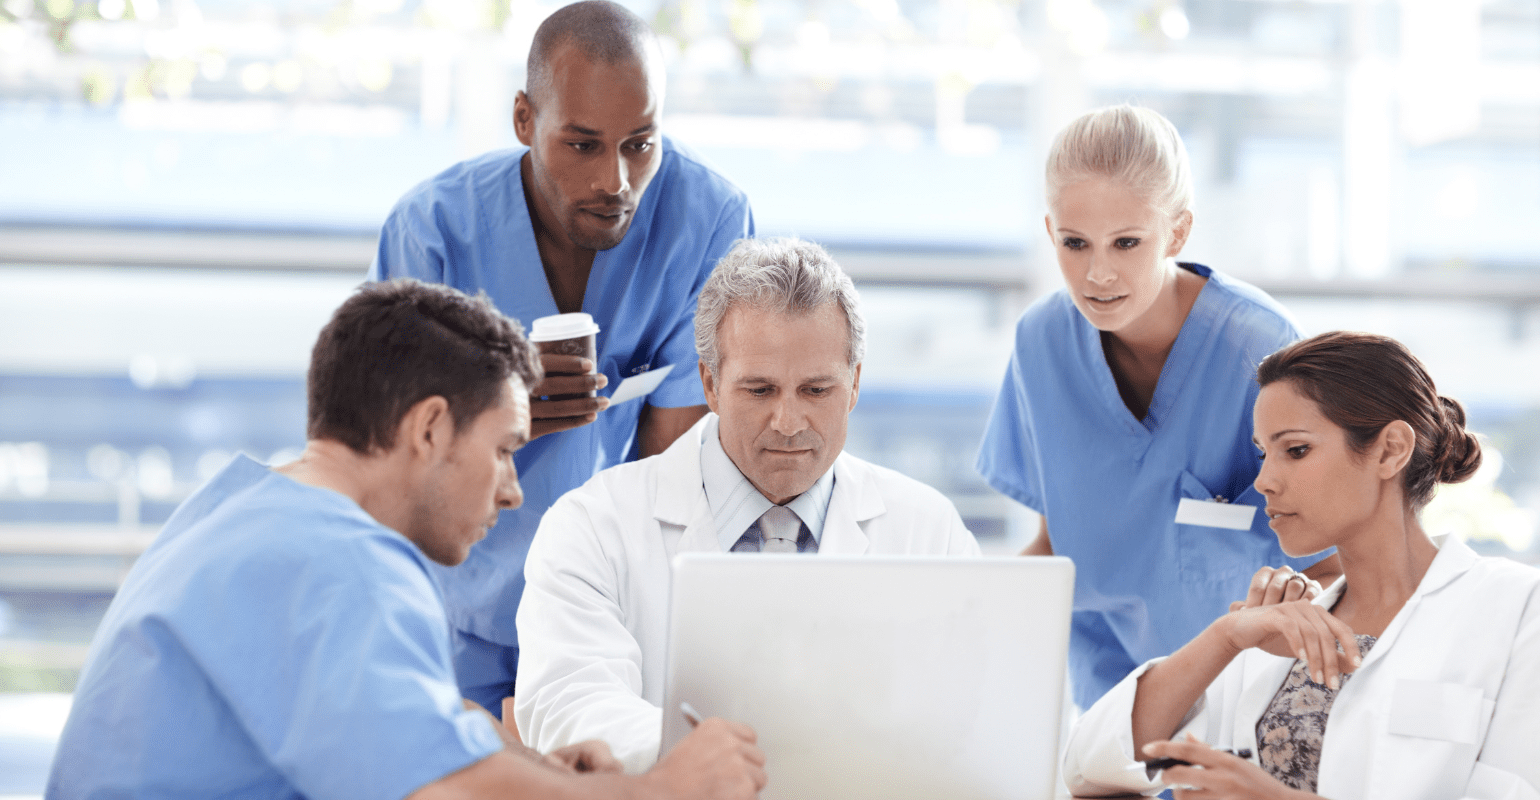 Can data science unlock seamless workflows for physicians?